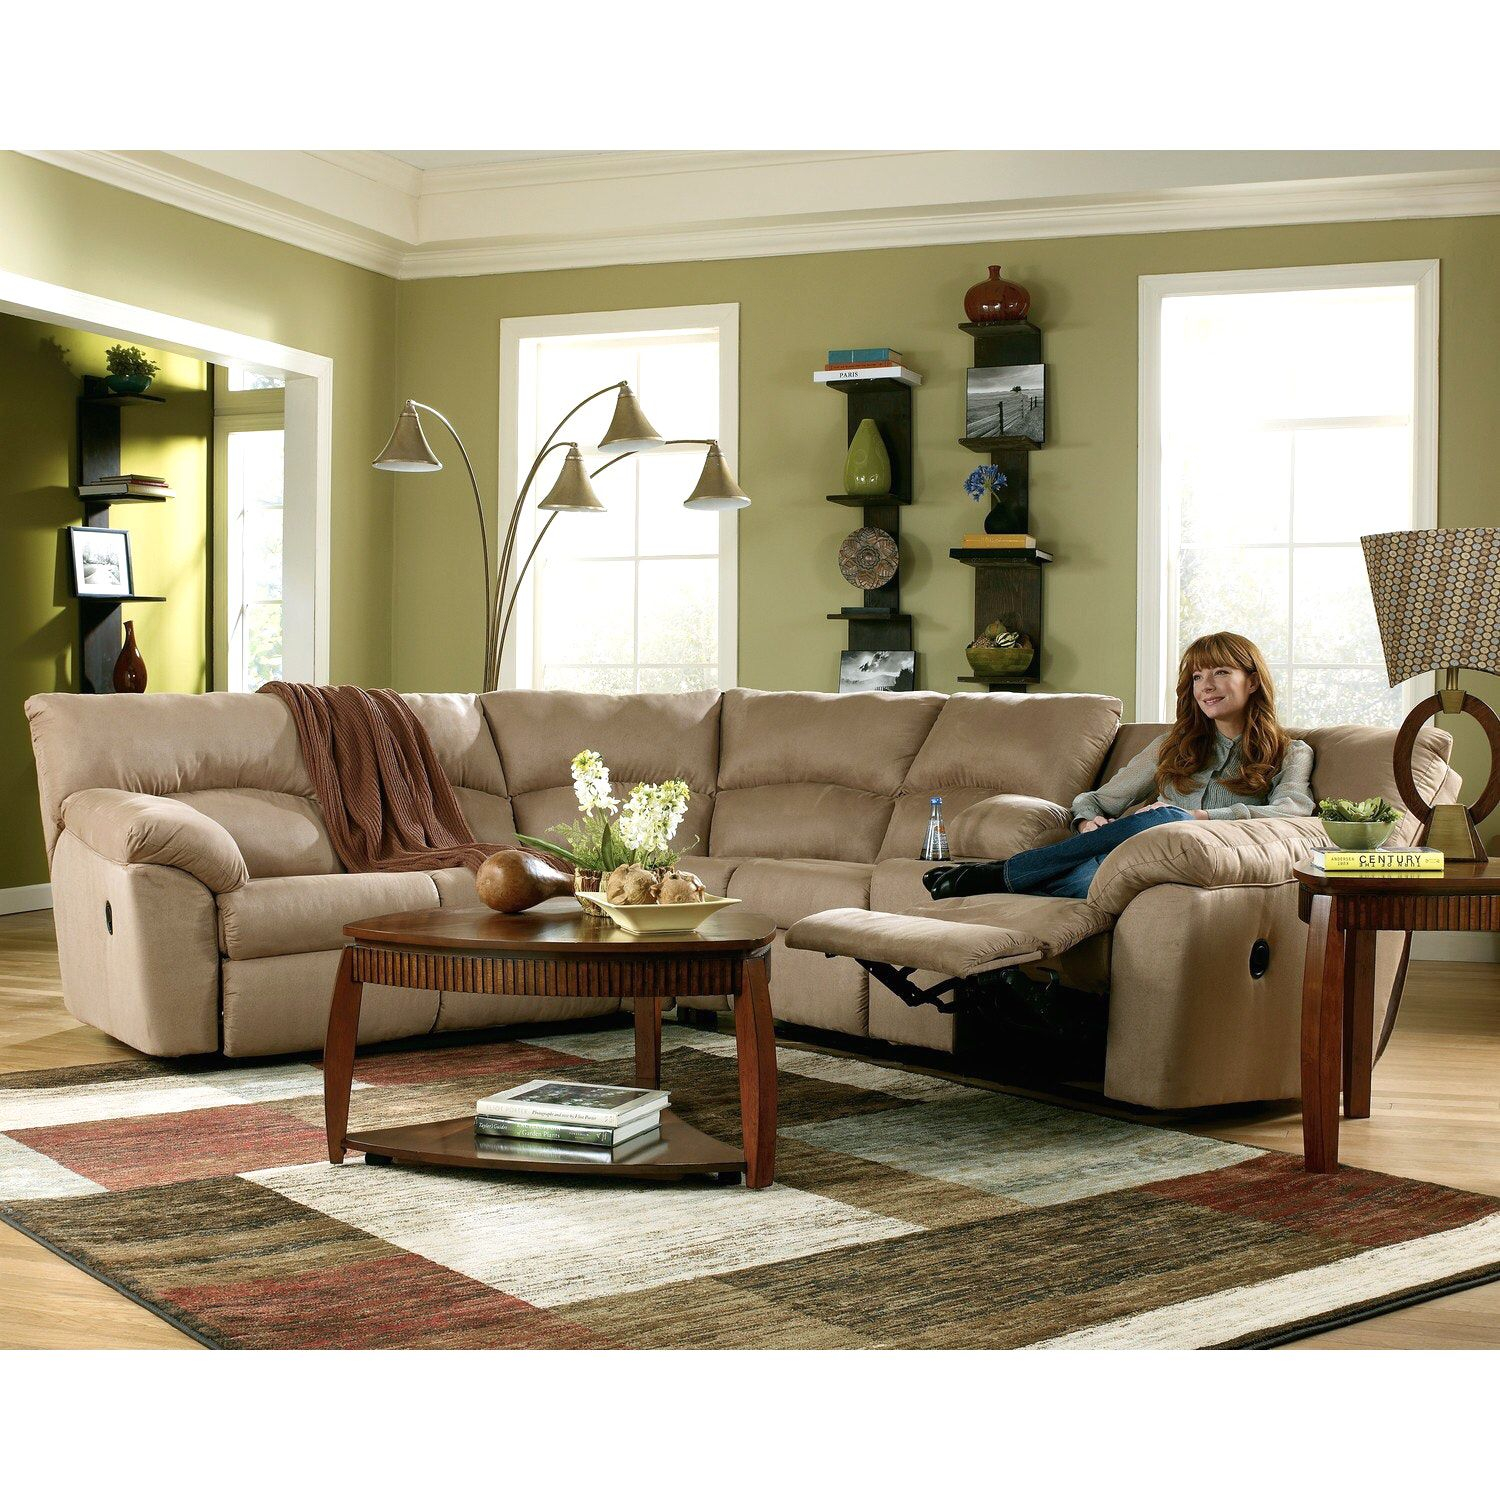 Pin Rosebud On Dining Living Room Furniture Reclining with regard to proportions 1500 X 1500